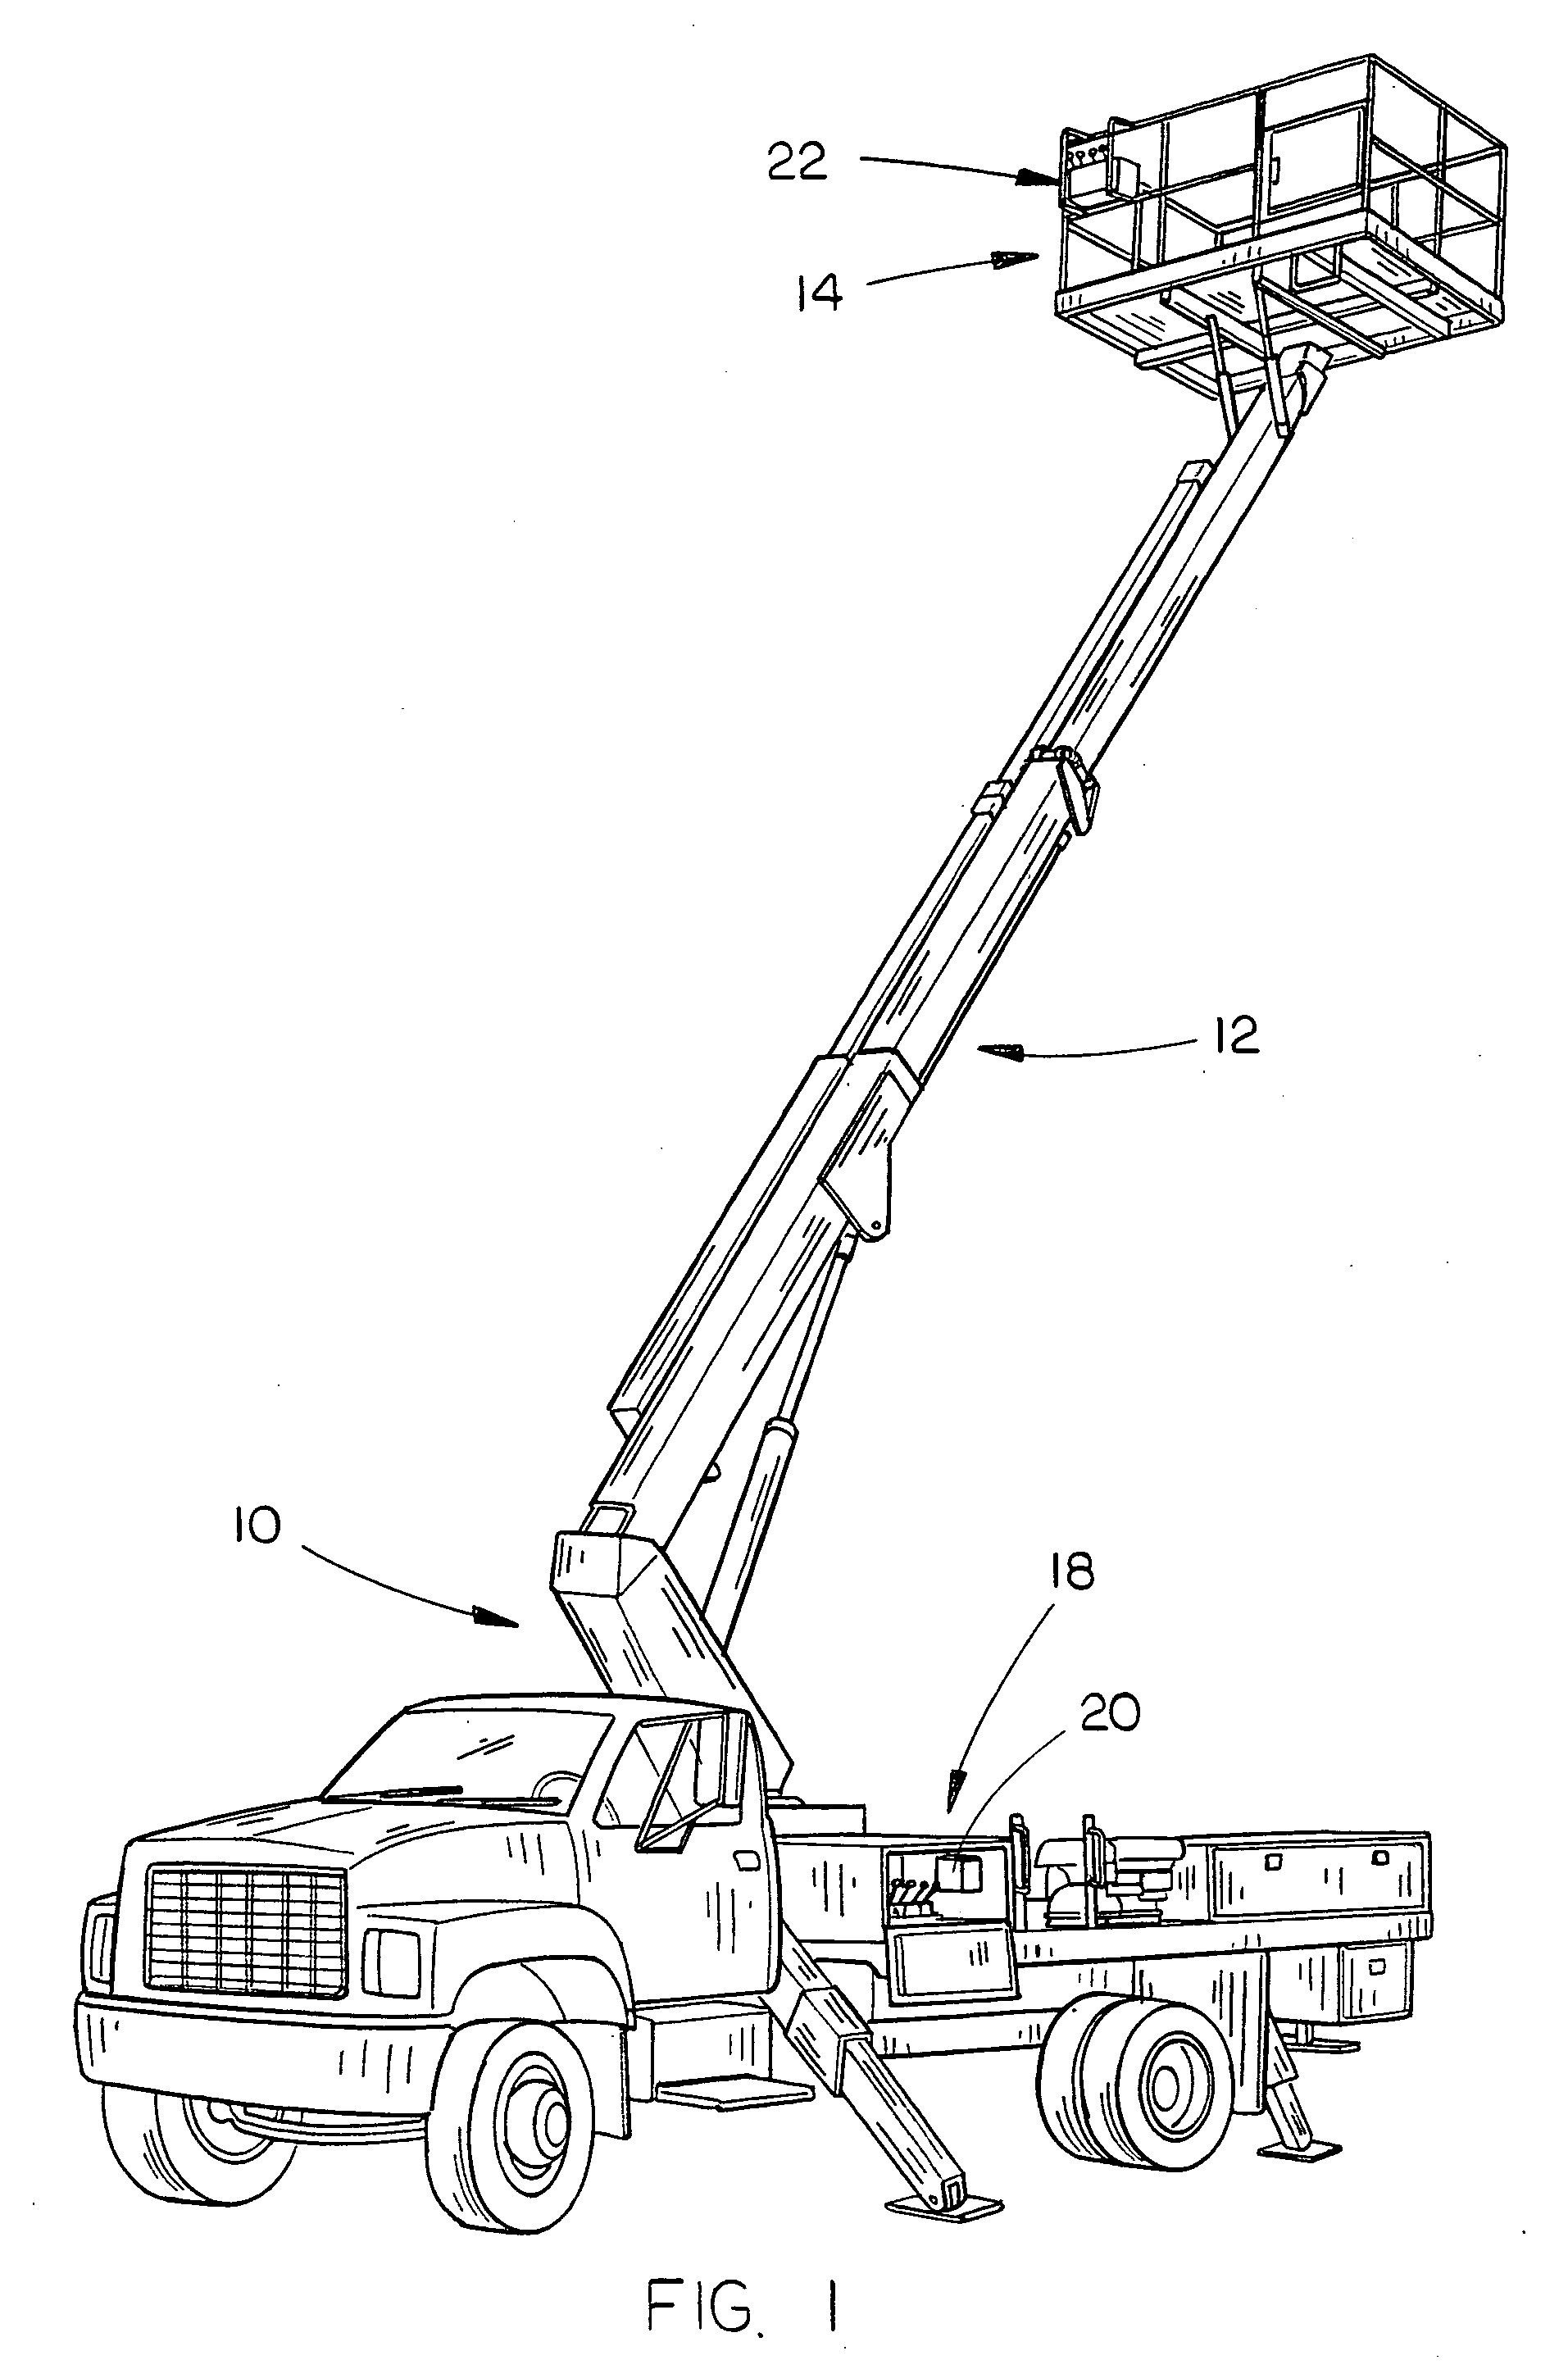 Wireless and wired control mechanism for an aerial lift or crane